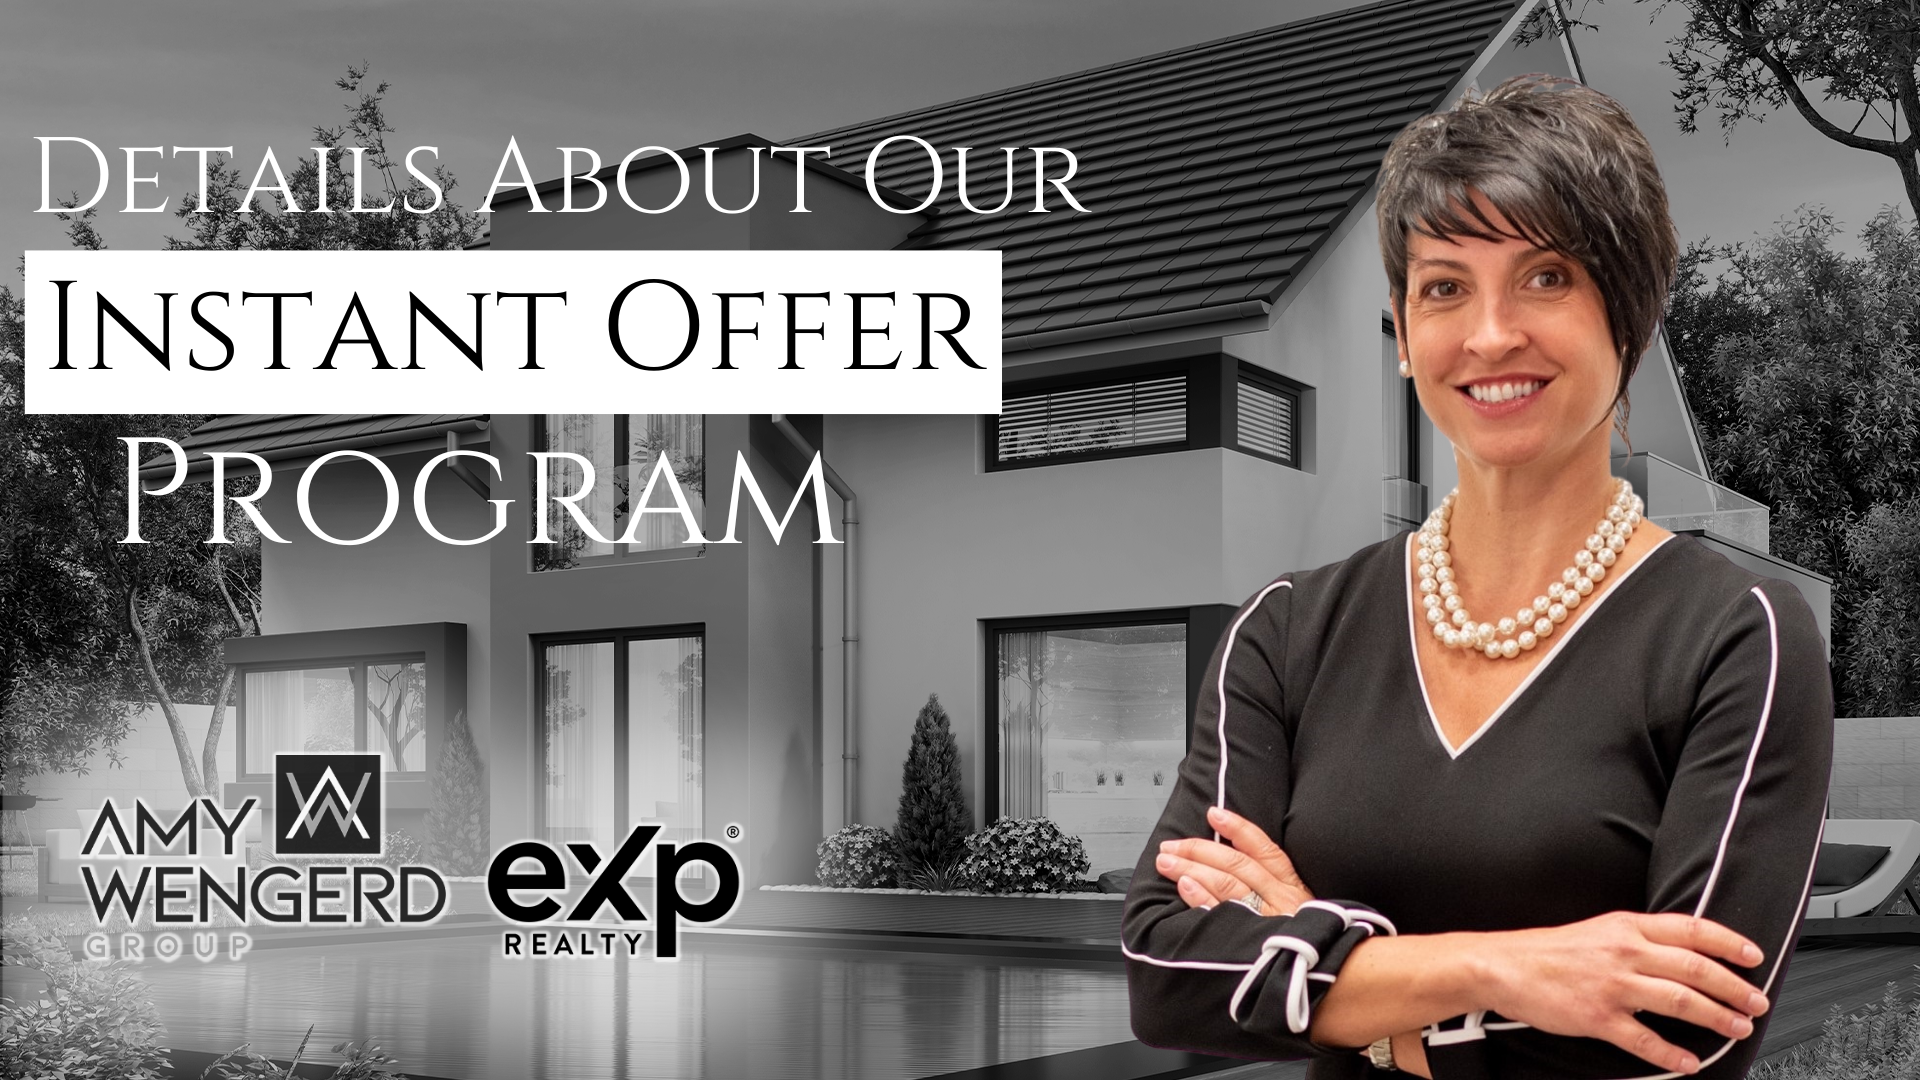 How Our Instant Offer Program Can Benefit You